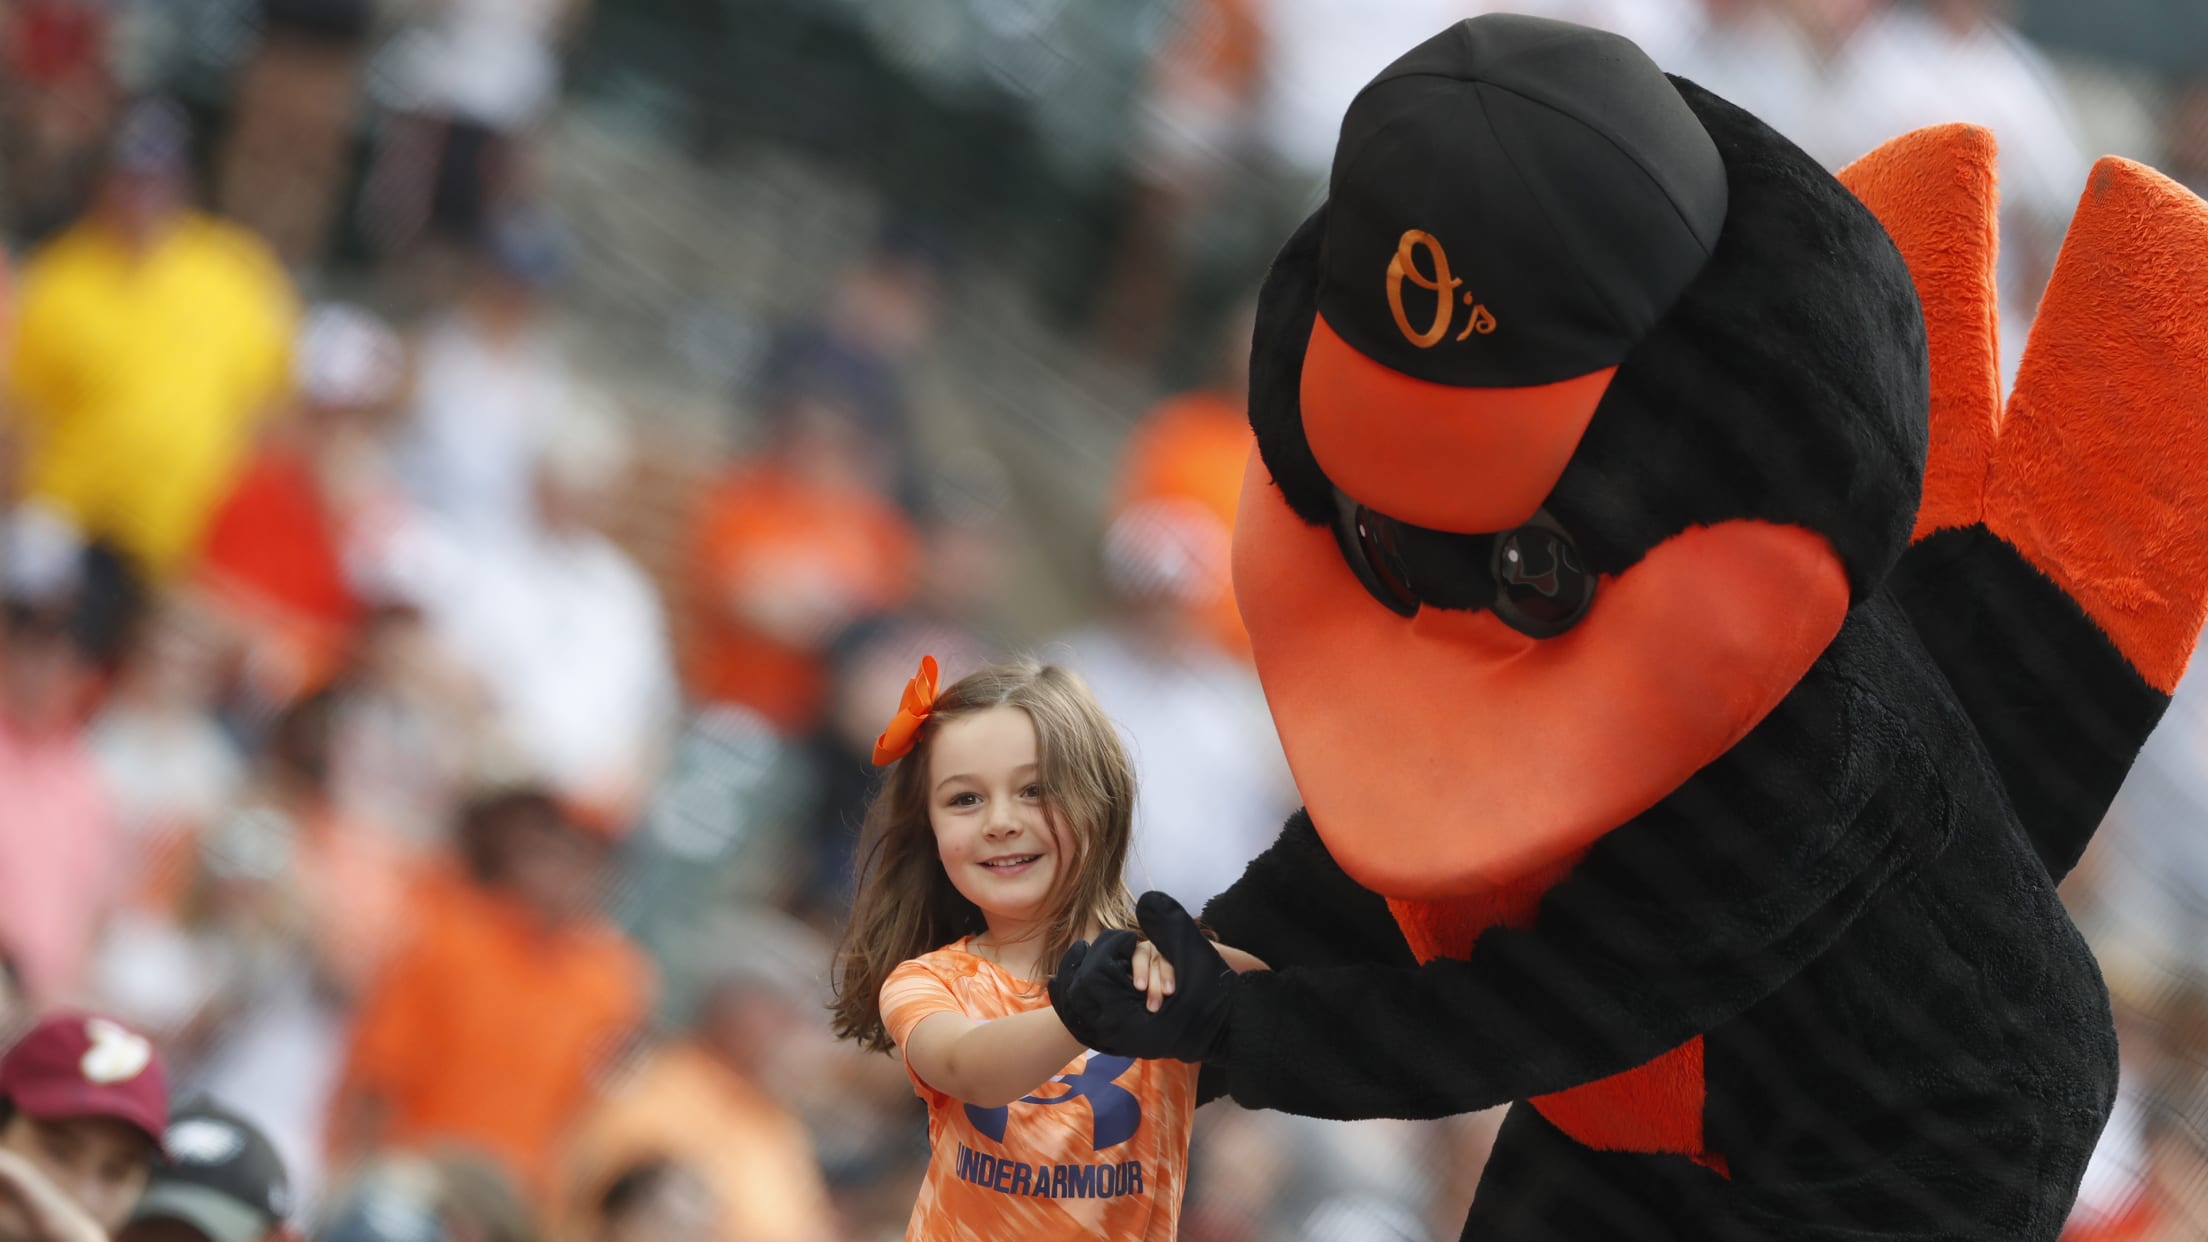 Orioles Bird Named Finalist For Mascot Hall Of Fame 2020 - CBS